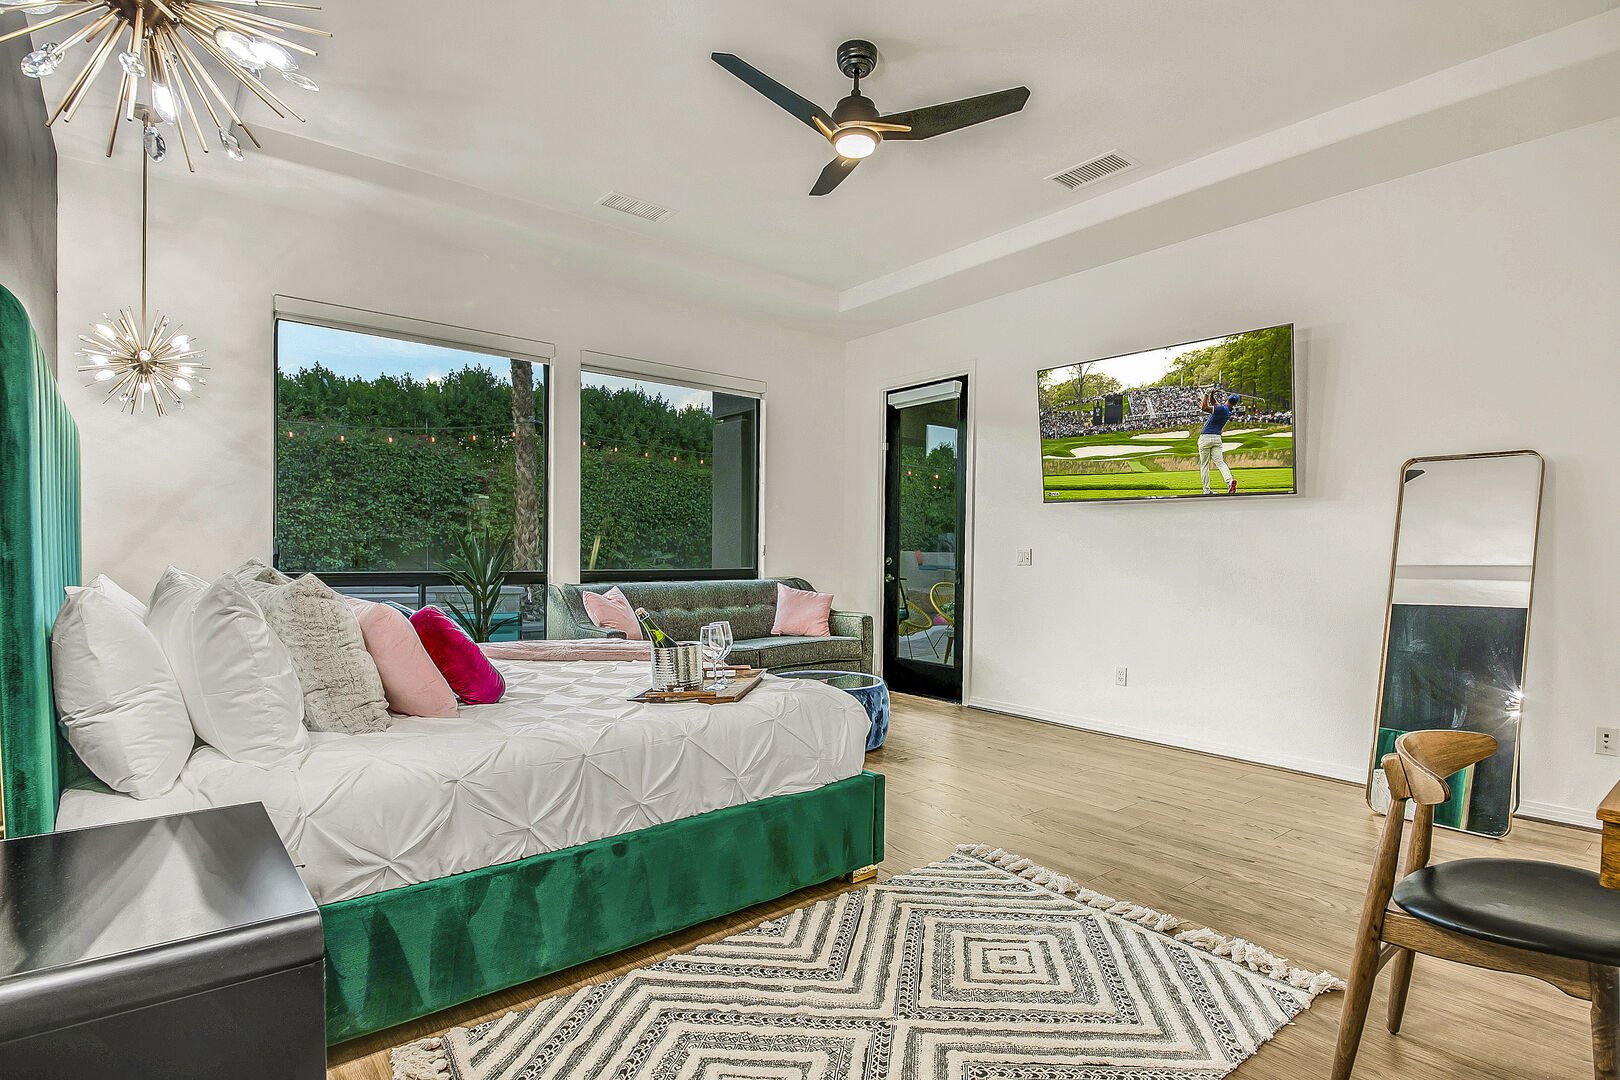 Master Suite 1 offers direct access to the patio!